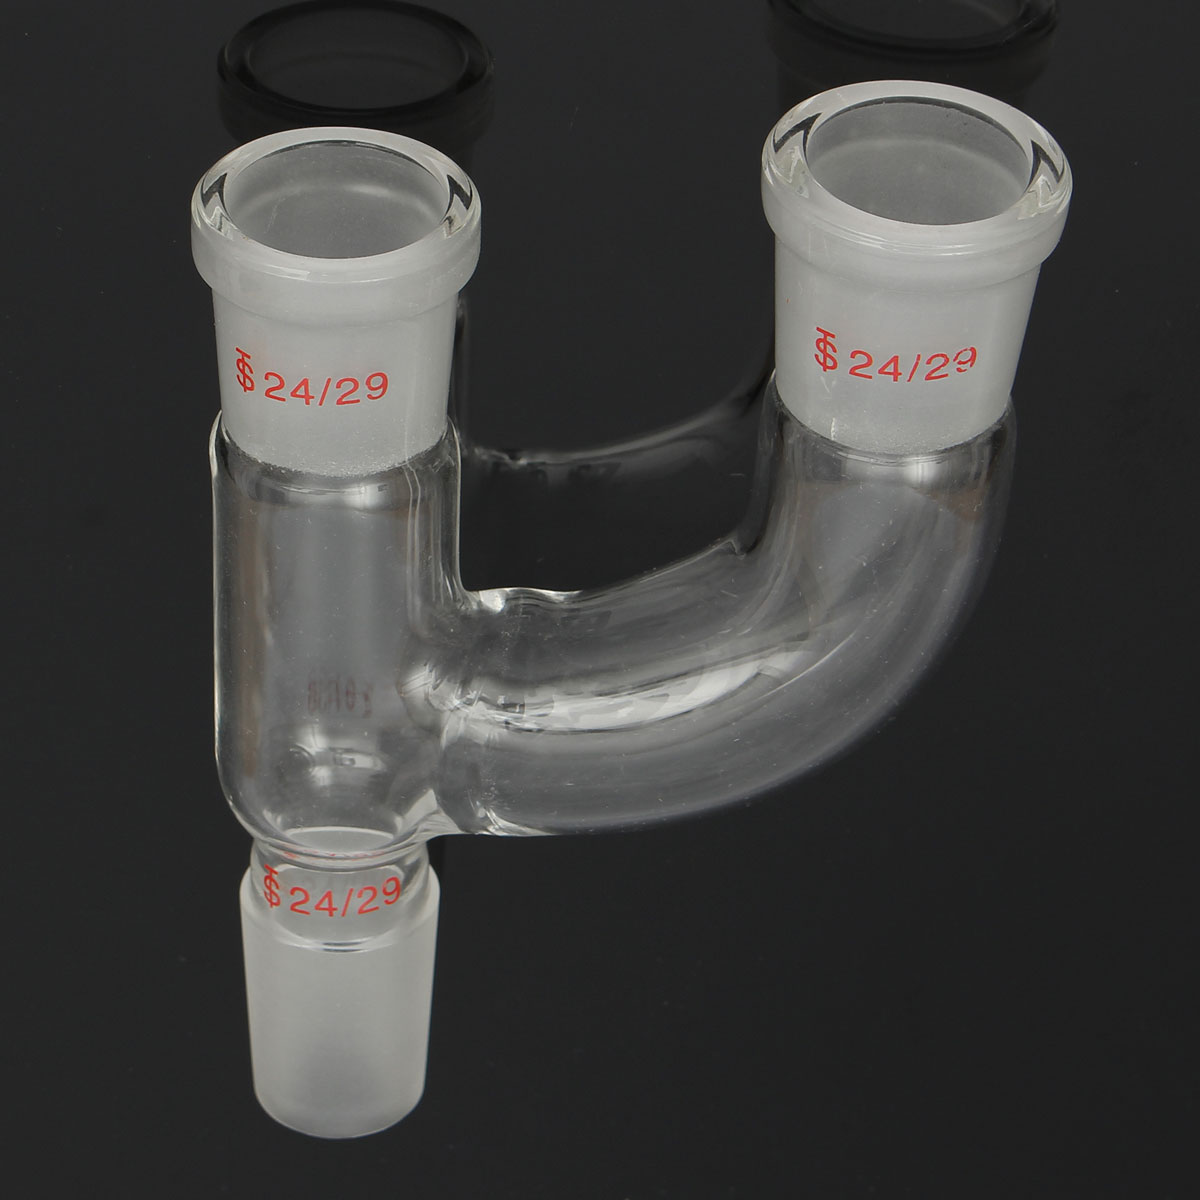 3-Way-Glass-Claisen-Adapter-w-2429-Joints-Borosilicate-Connecting-Adapter-Glassware-1036737-1